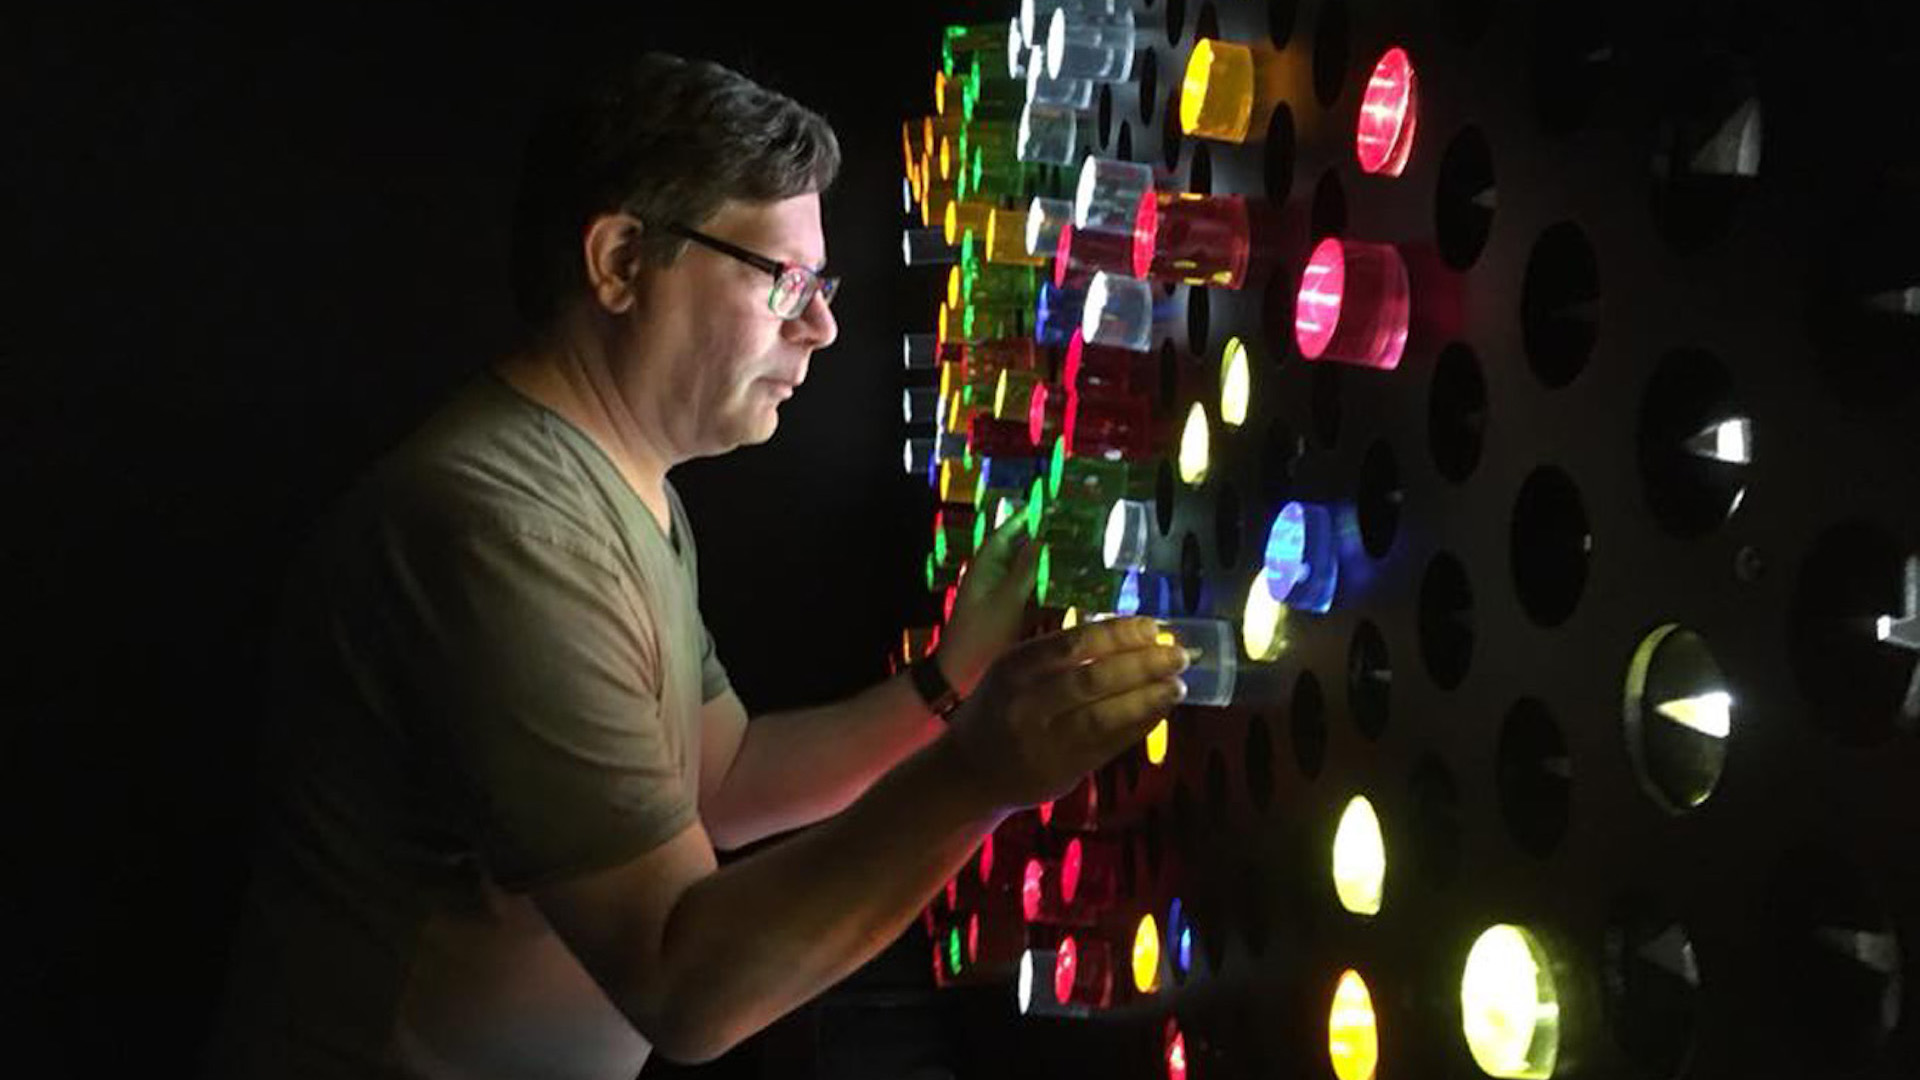 UX researcher Steve Portigal looks at a colourful wall display.